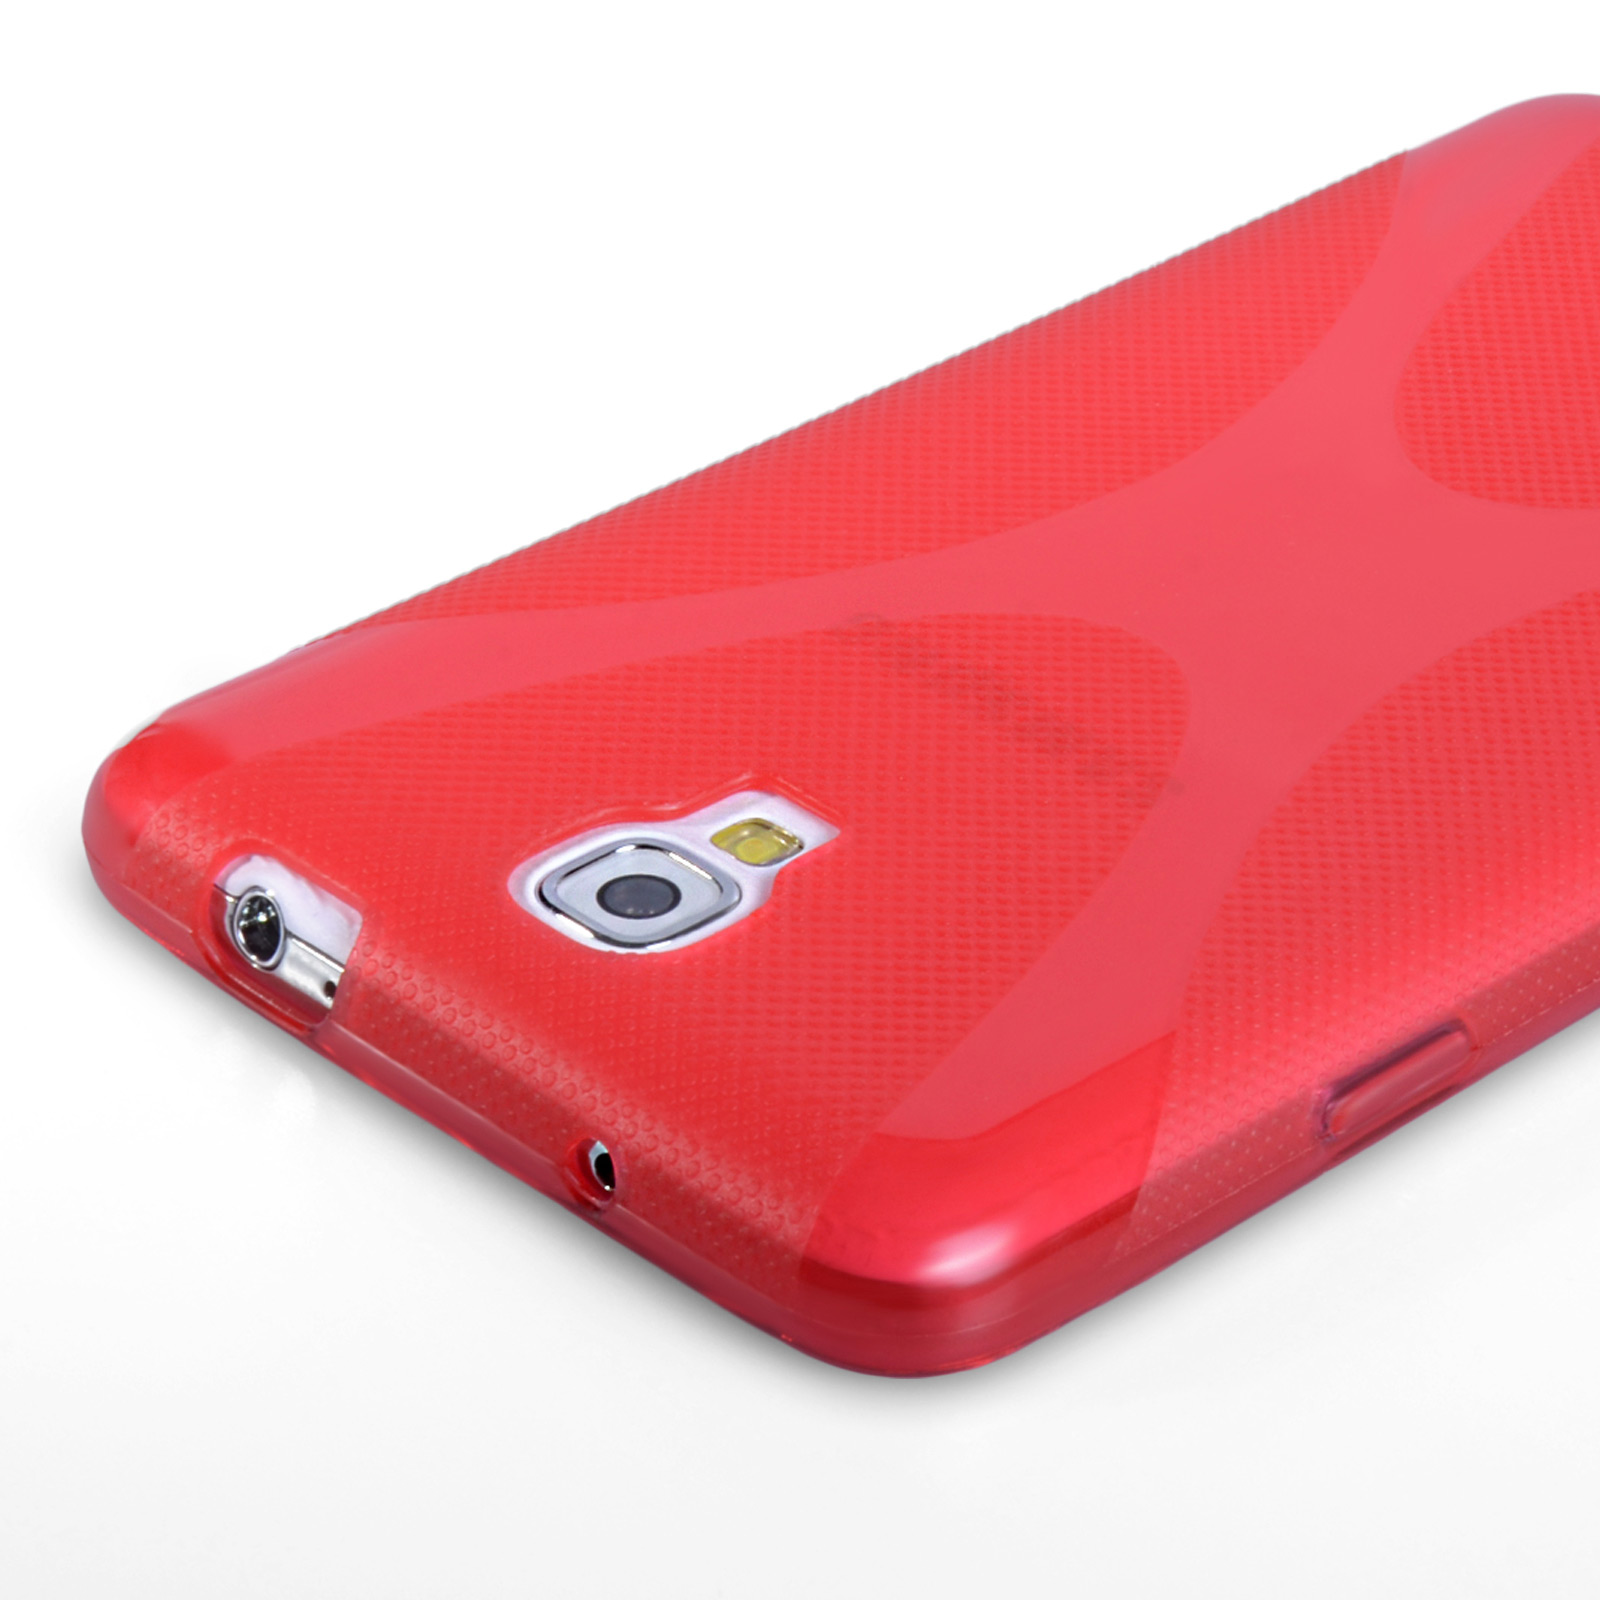 YouSave Samsung Galaxy Note 3 Neo Silicone Gel X-Line Case - Red